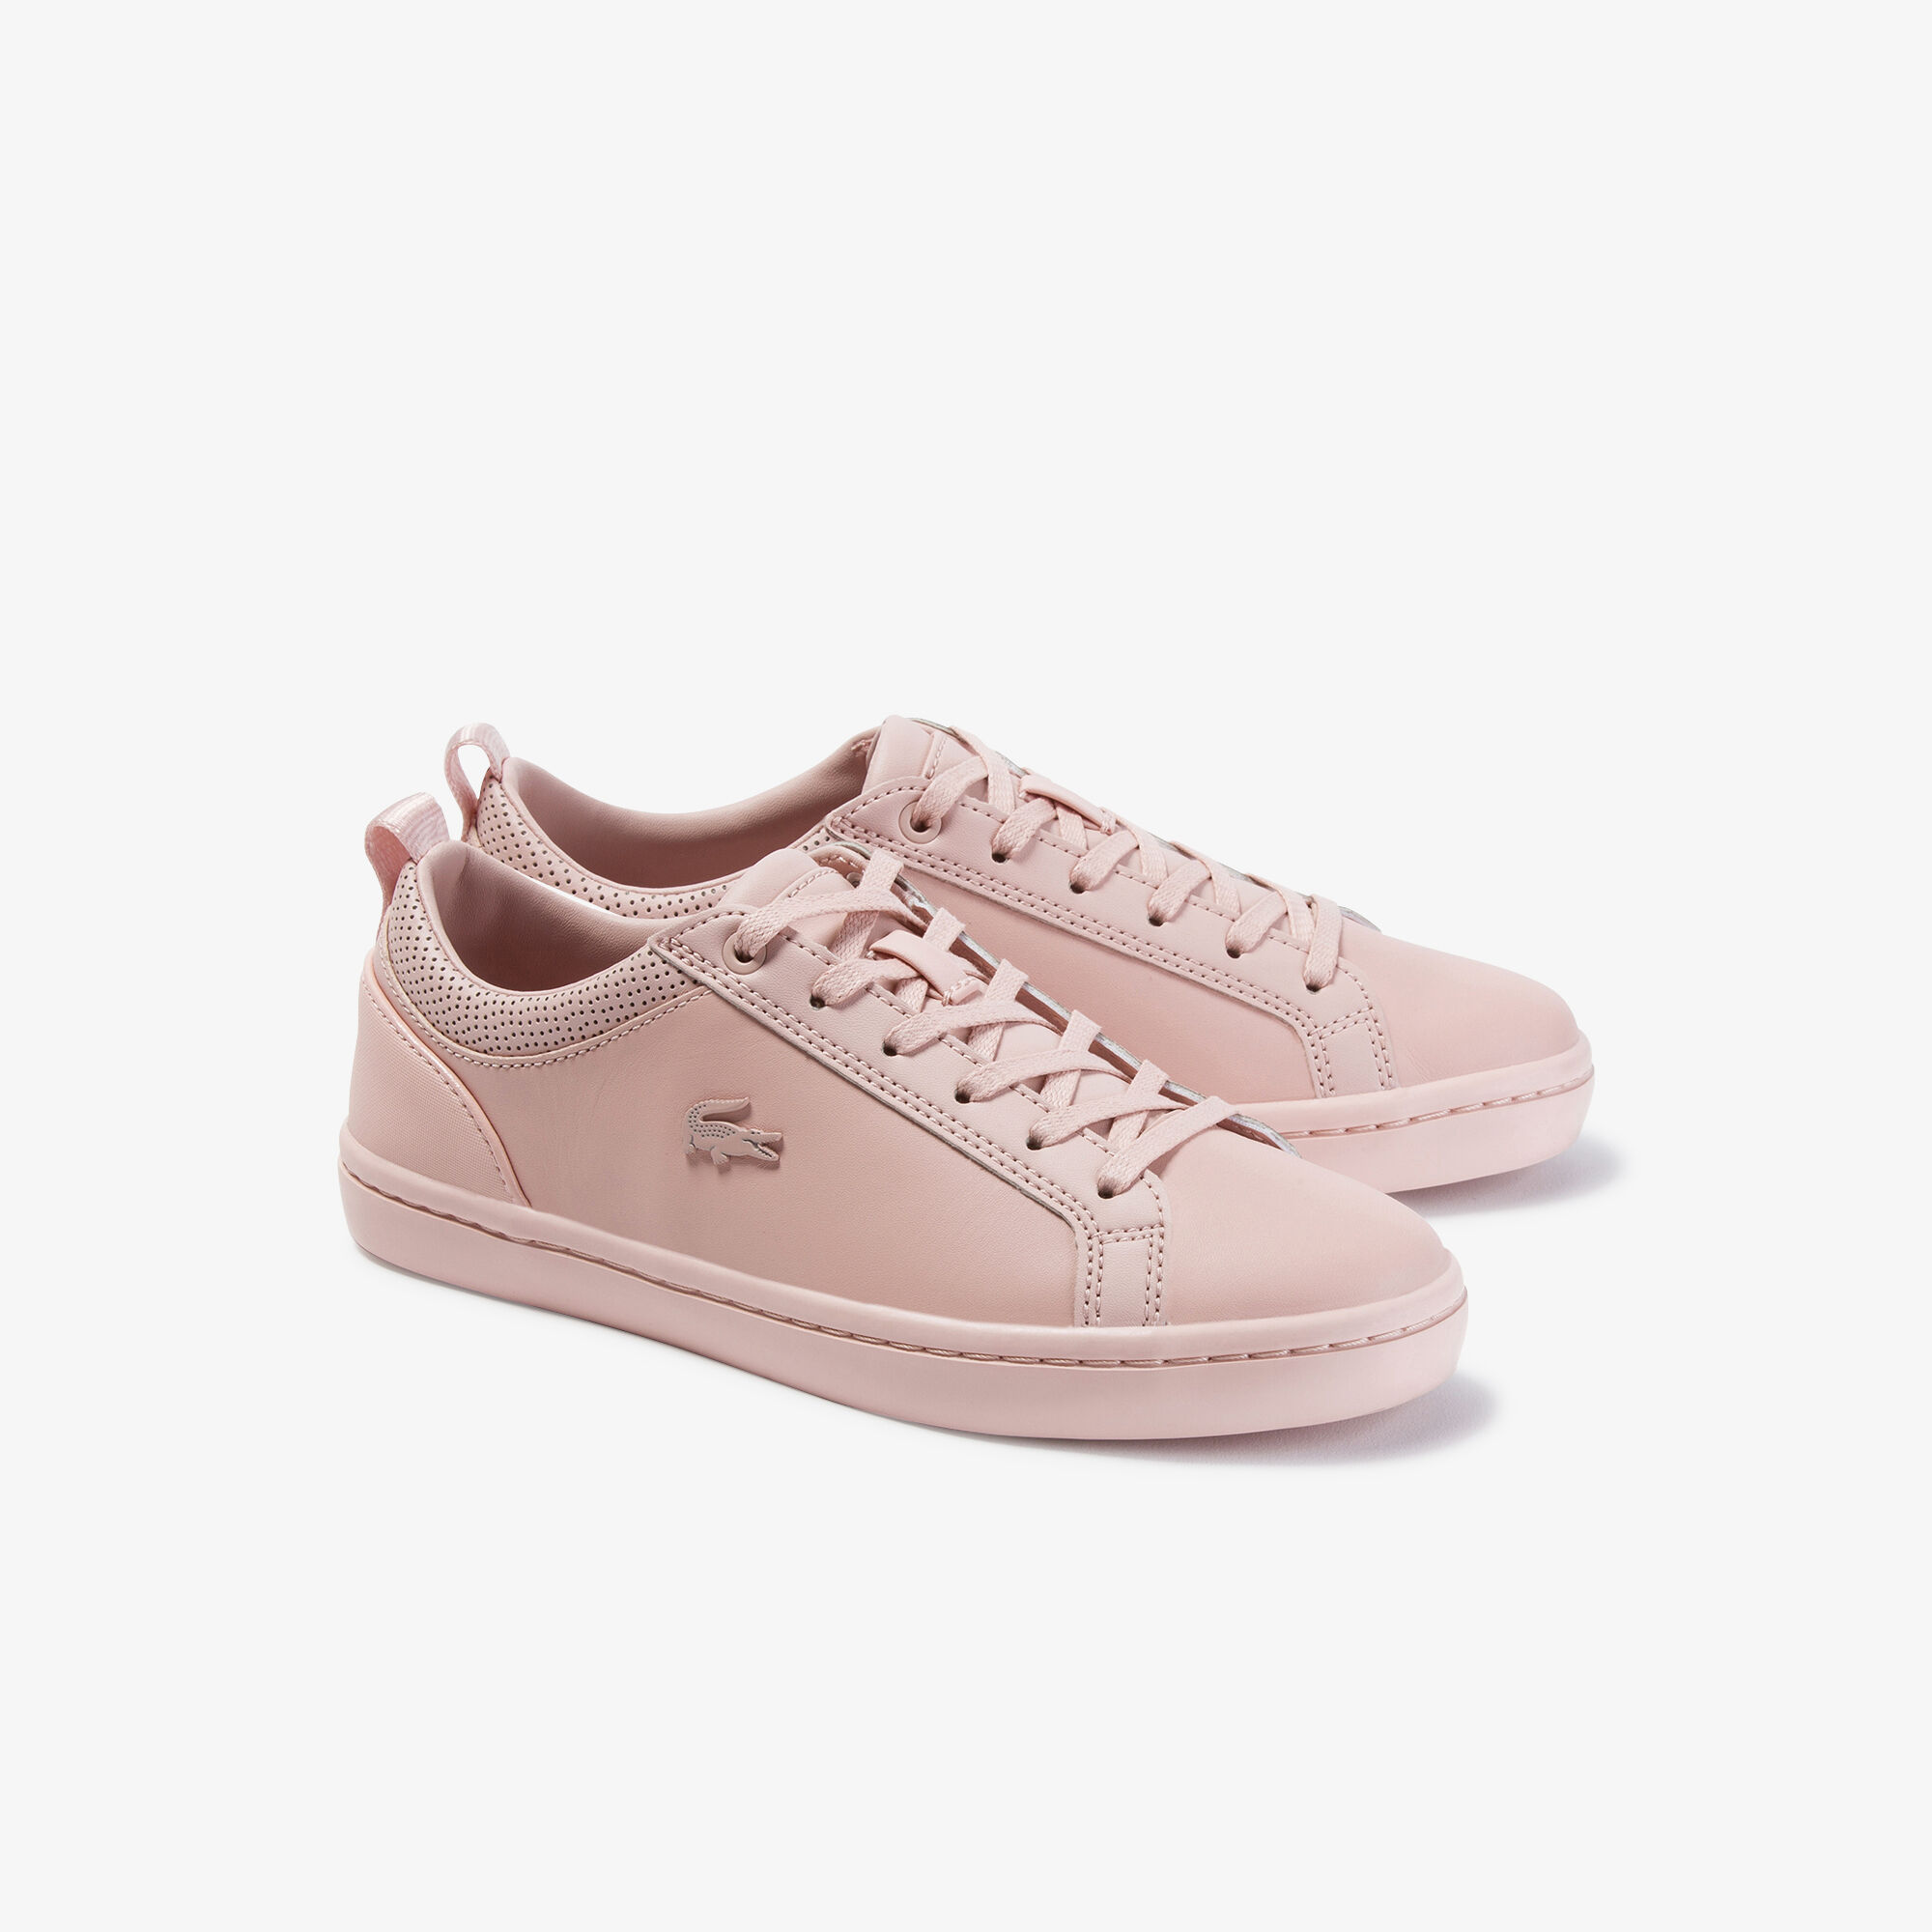 Women's Straightset Leather and Synthetic Sneakers